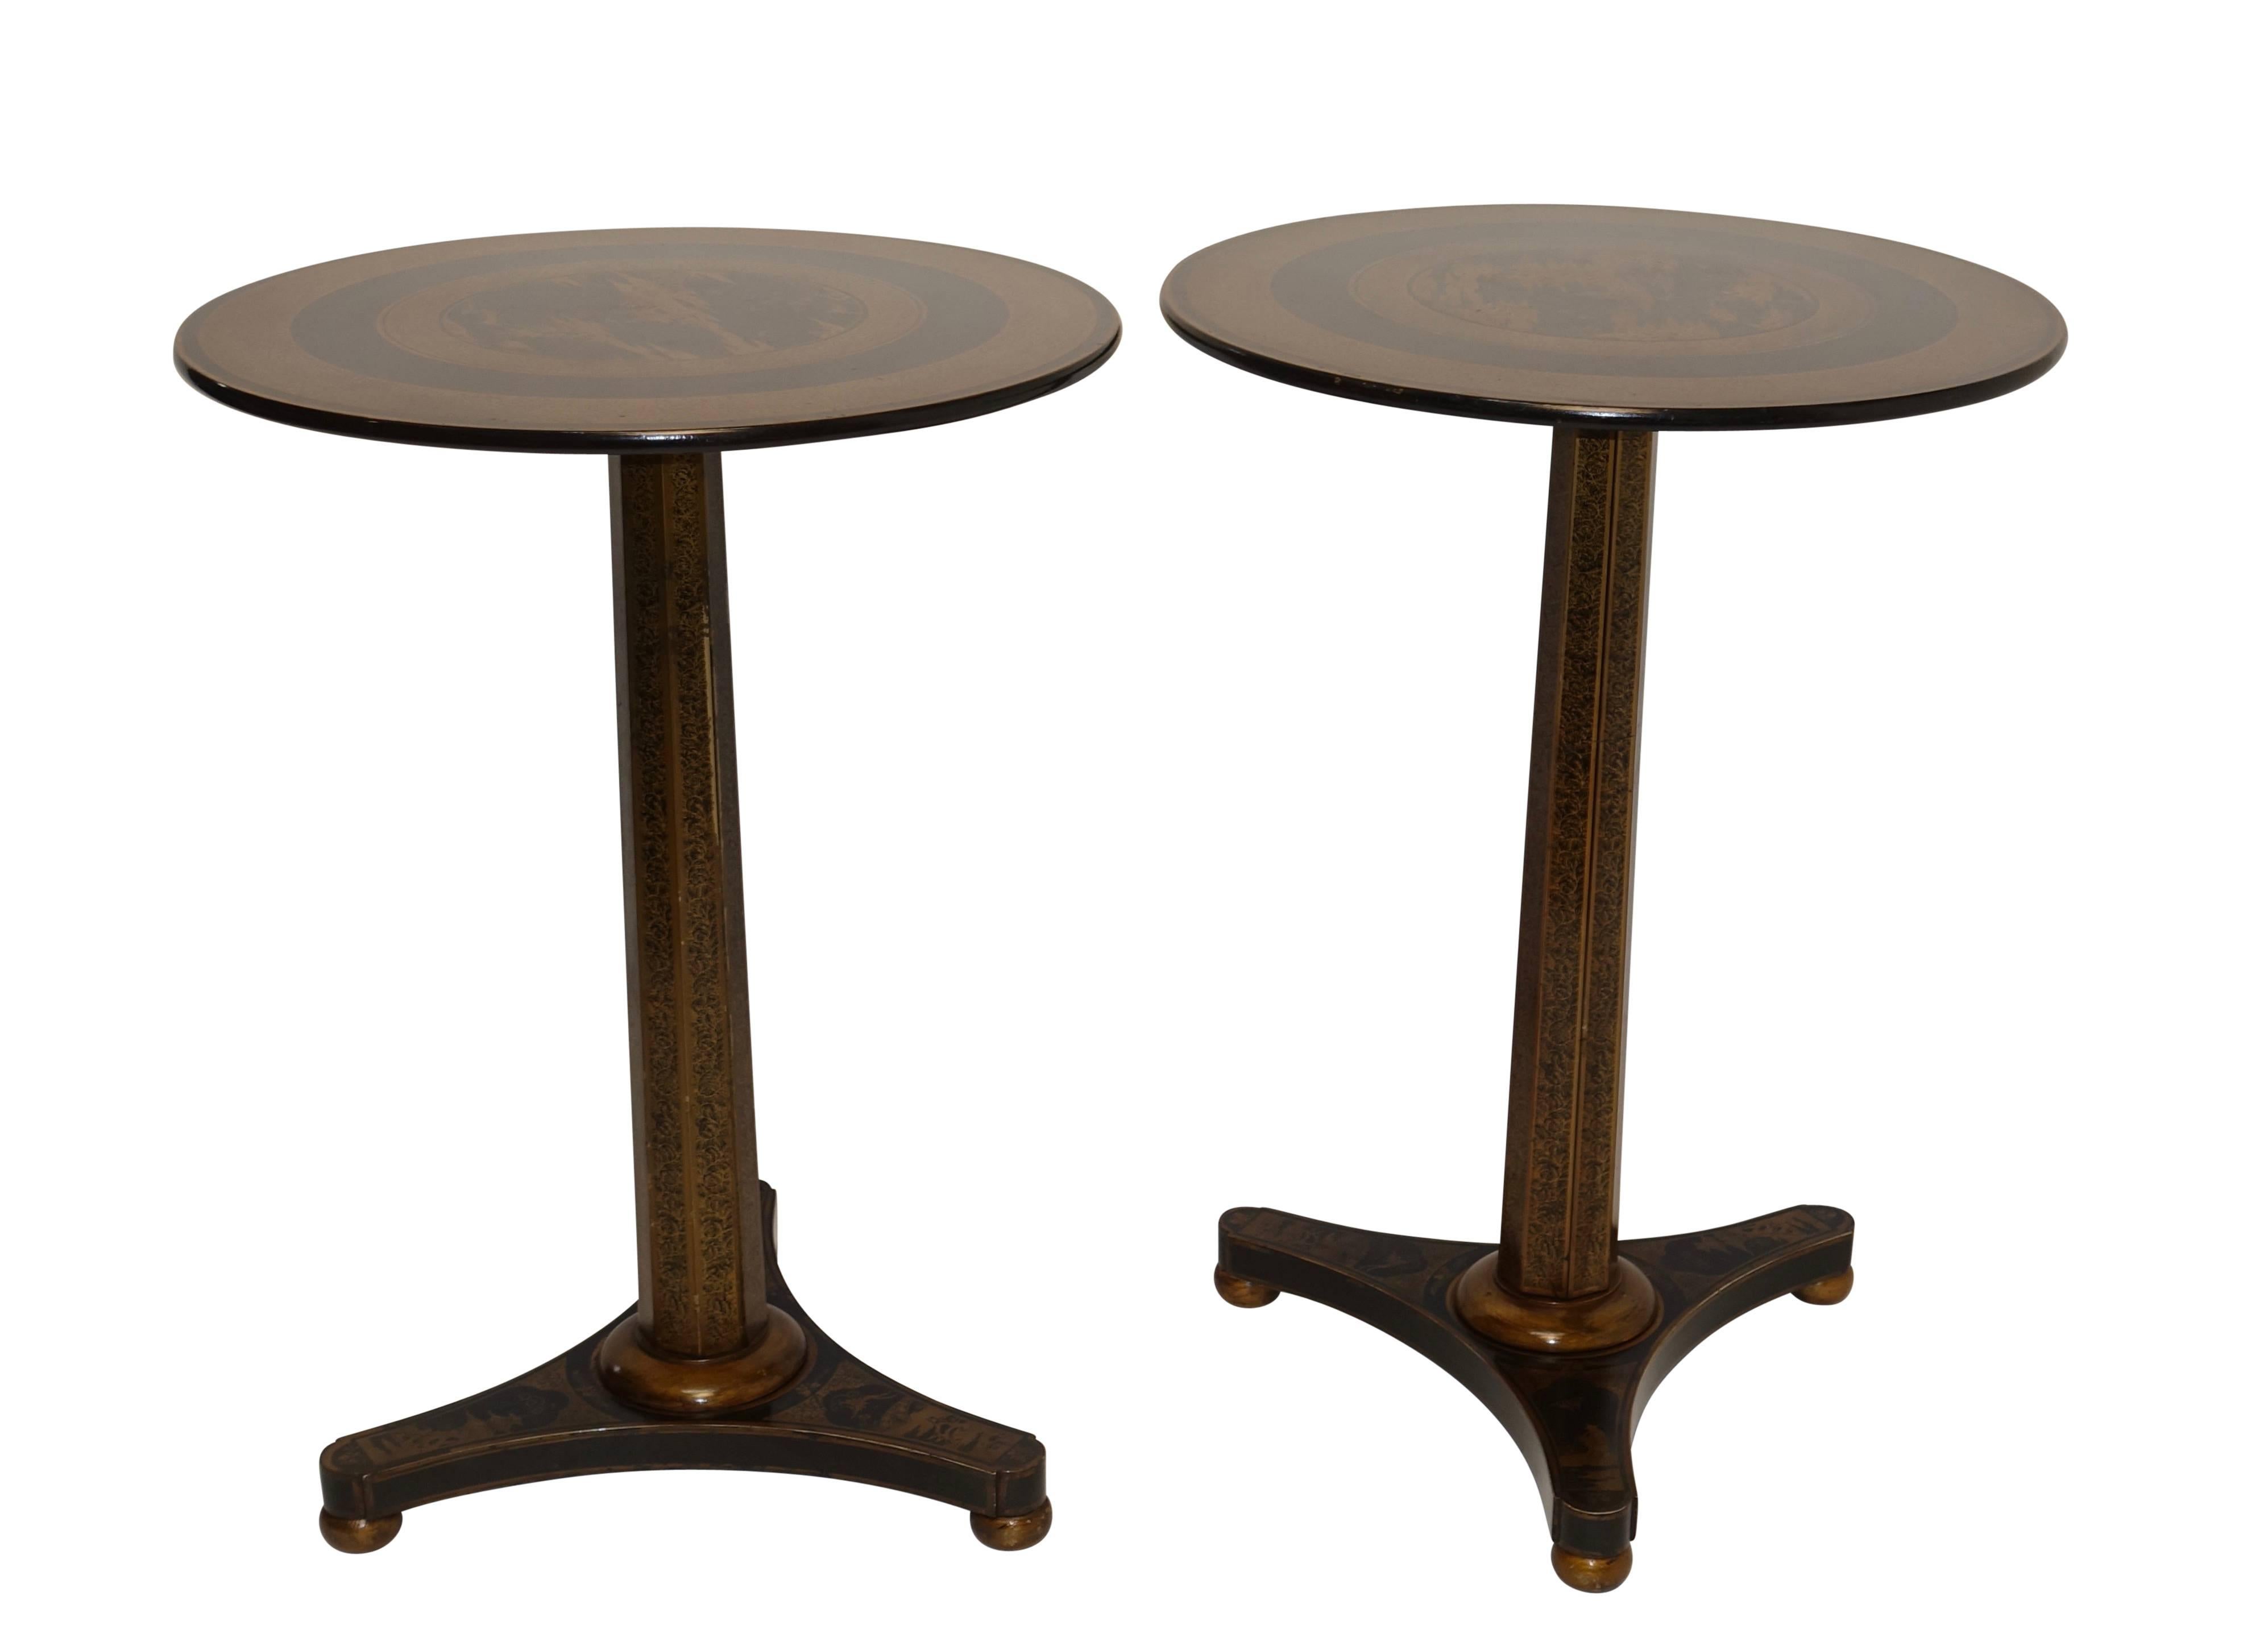 Wood Regency Black Lacquer Side Tables with Chinoiserie Decoration, circa 1840, Pair